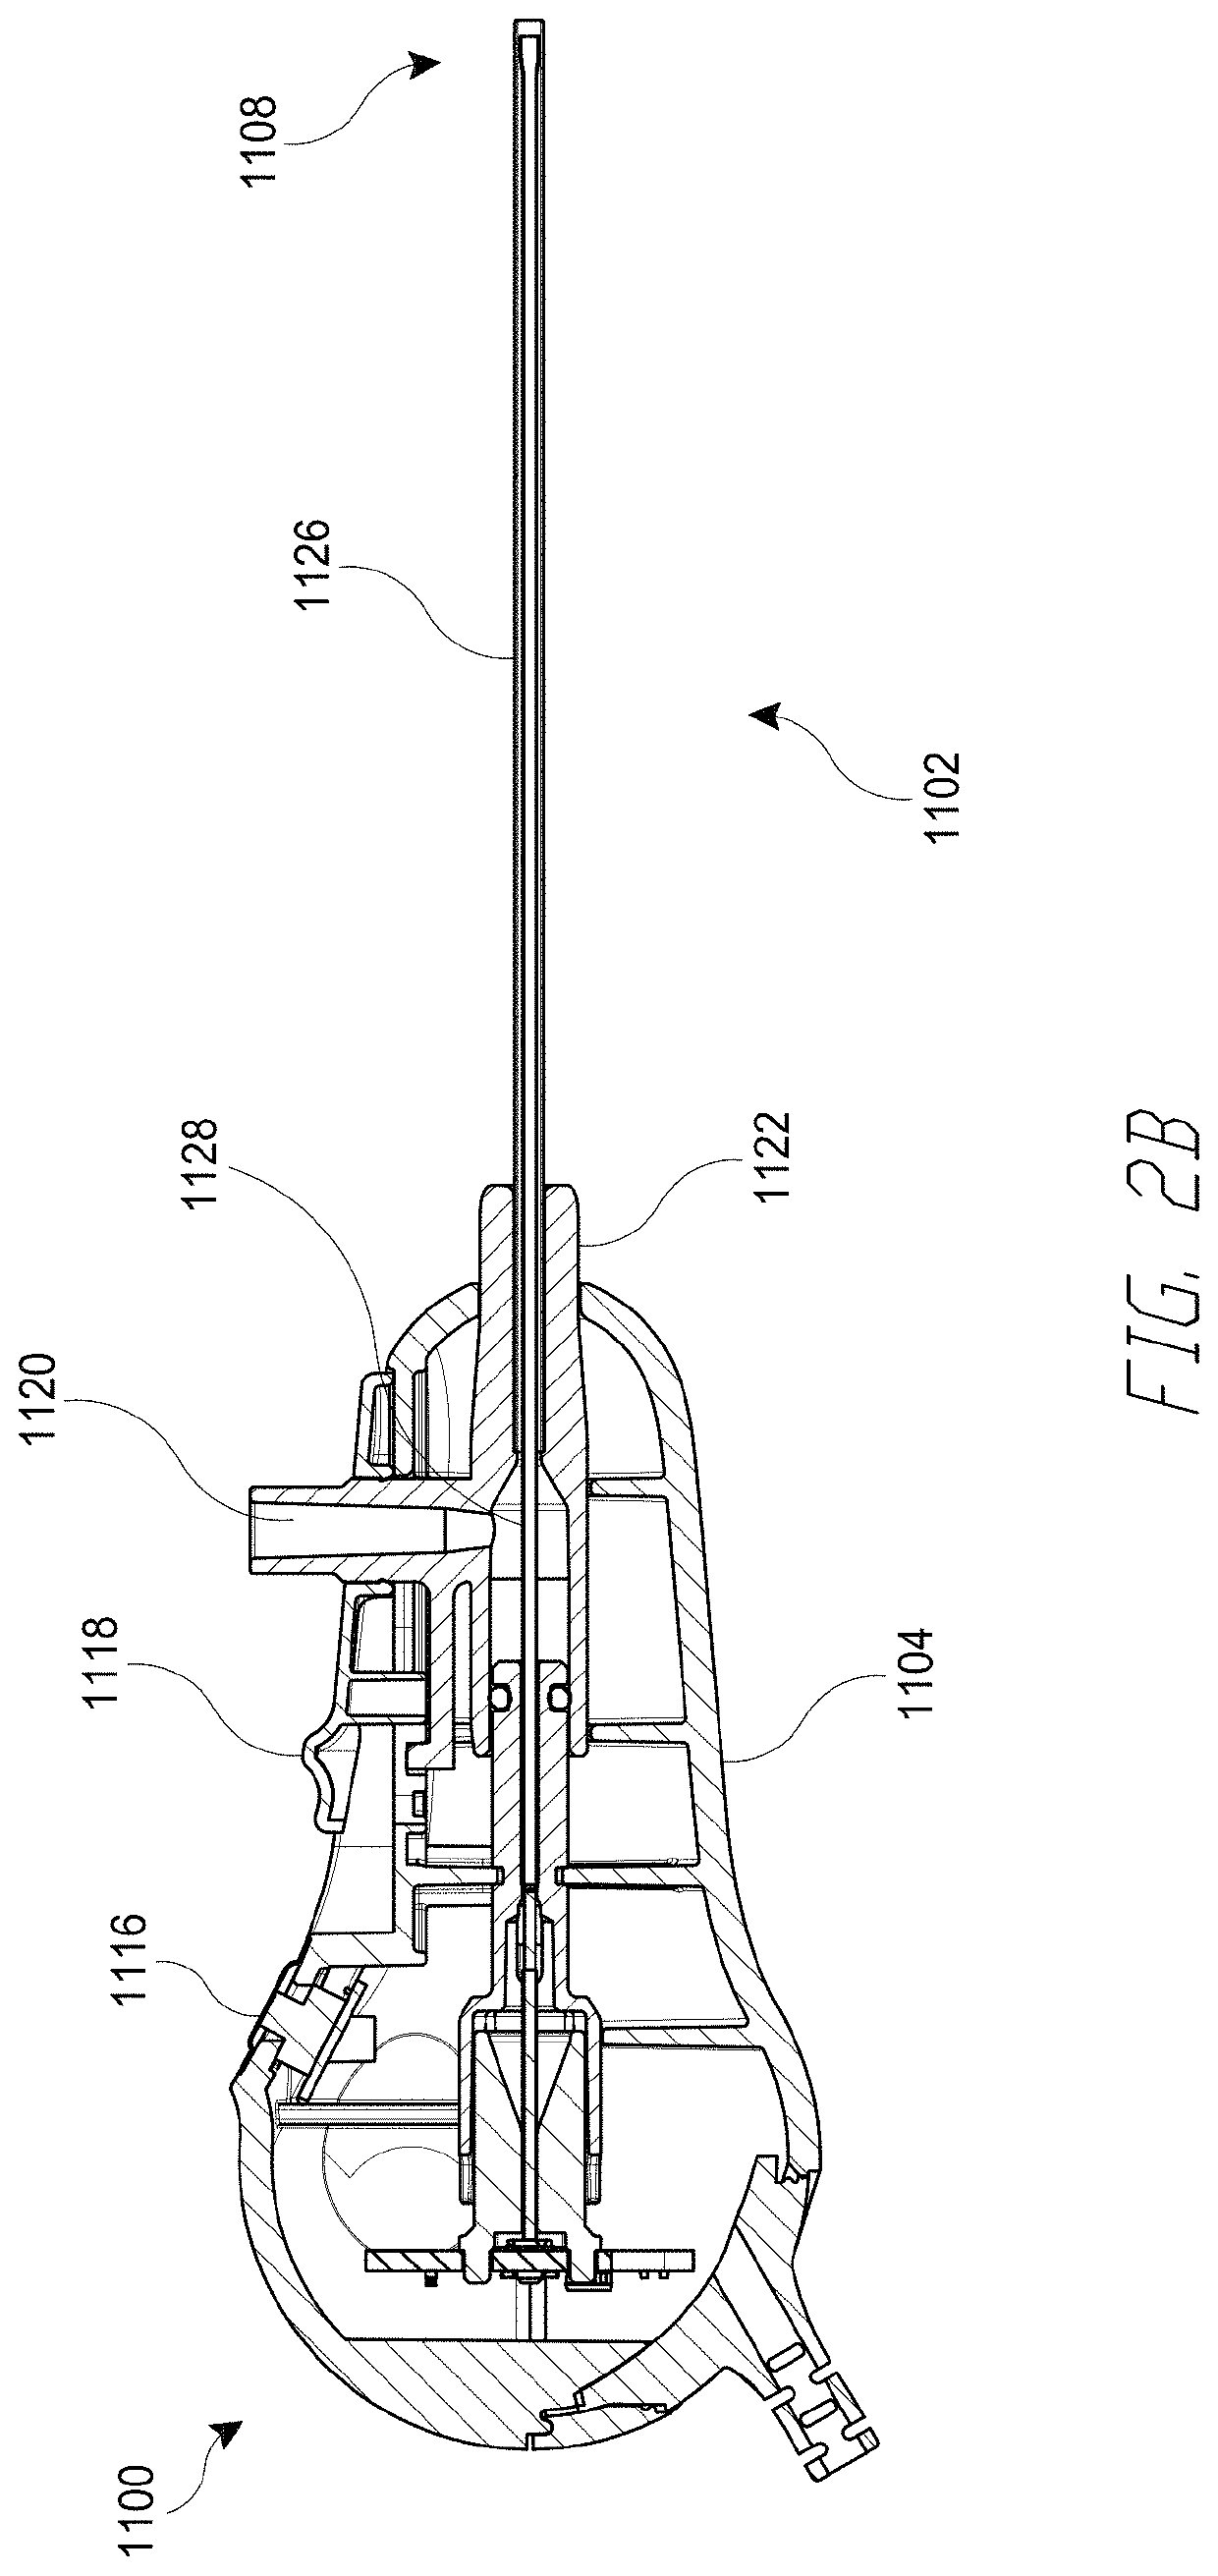 Clot evacuation and visualization devices and methods of use